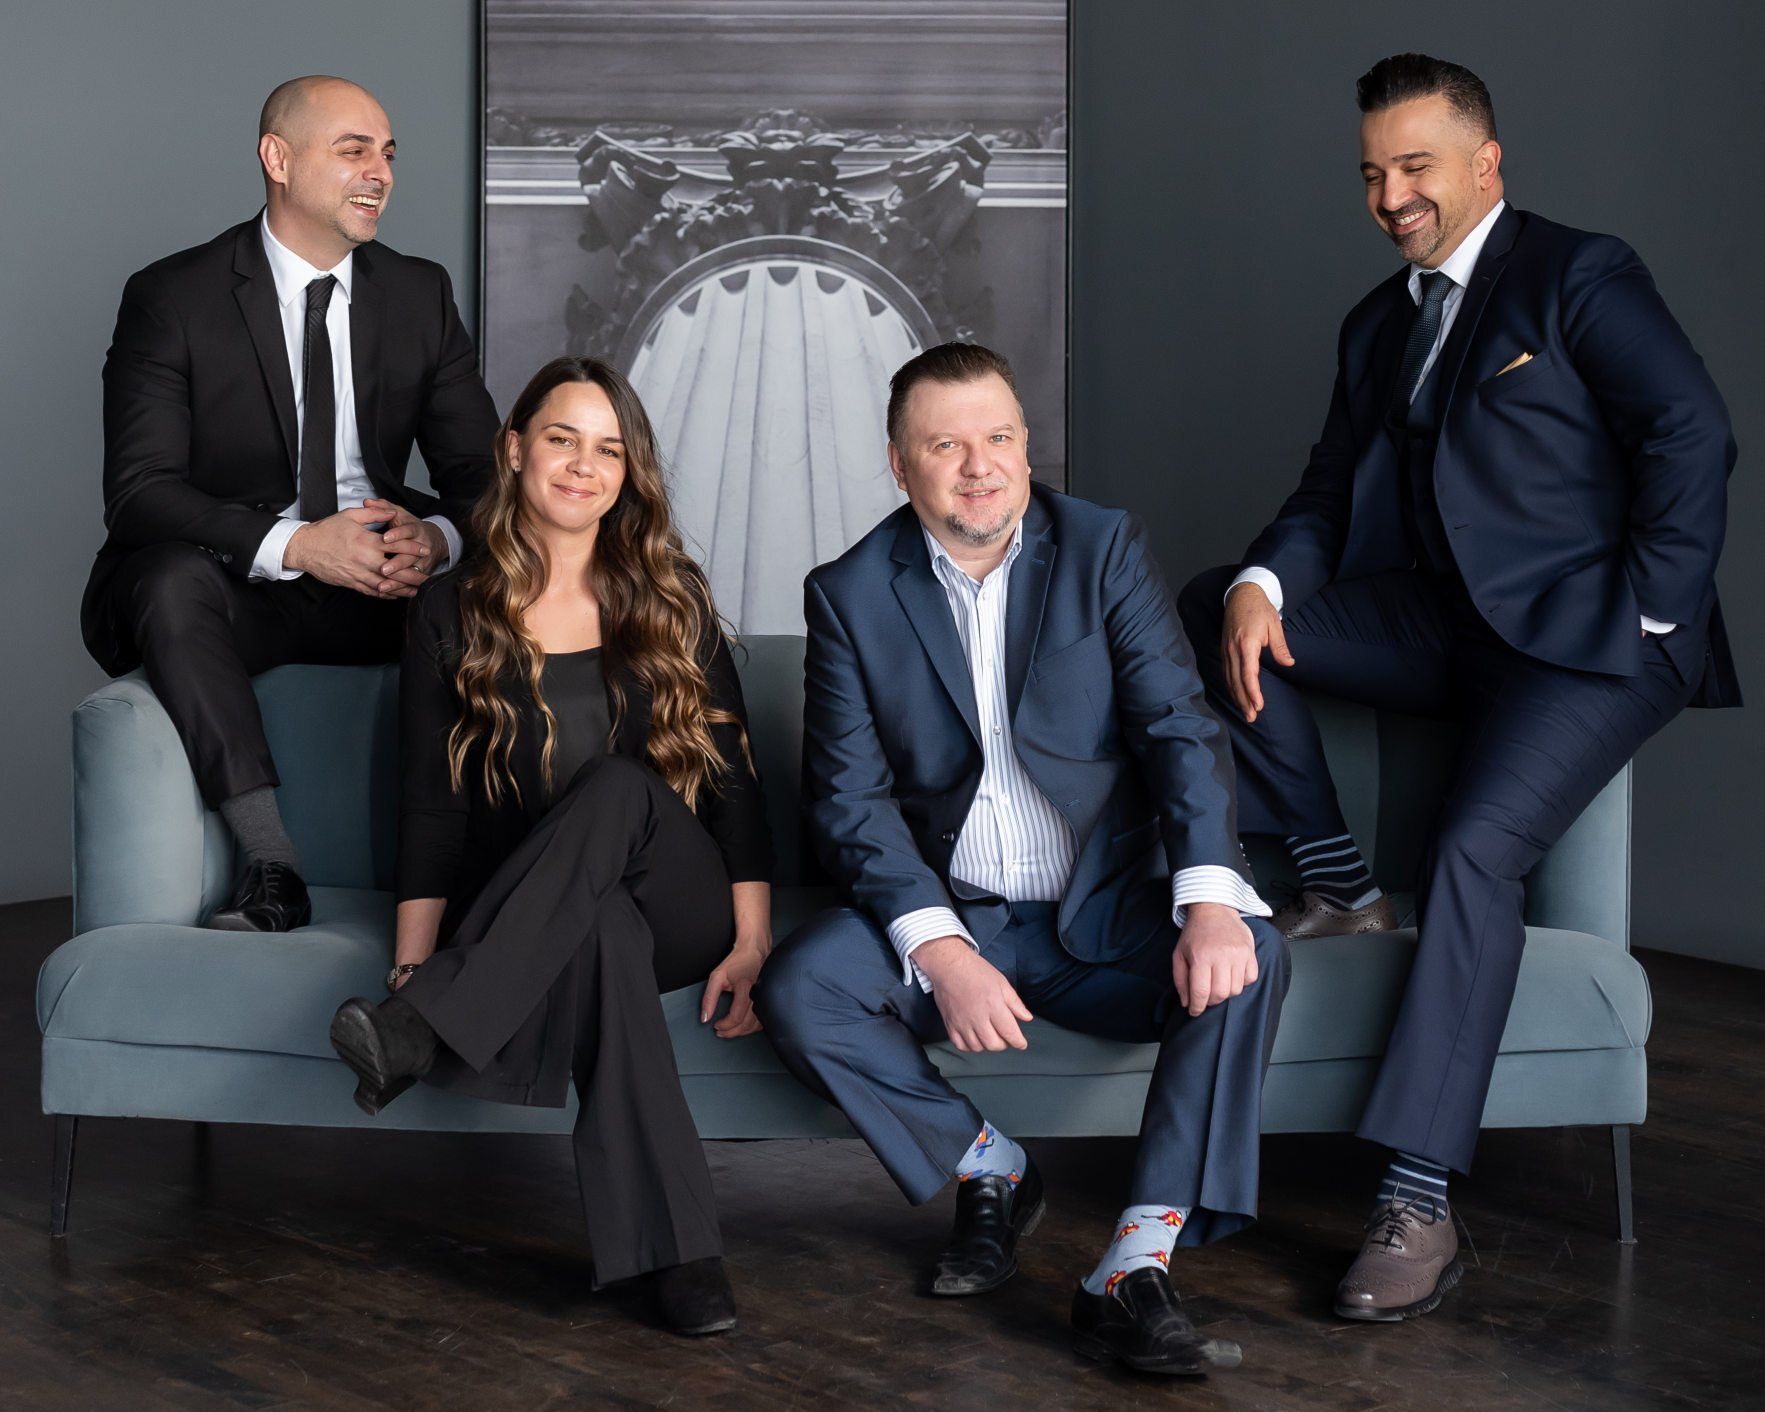 4 realtors sitting in a gray couch posing for a branding photoshoot